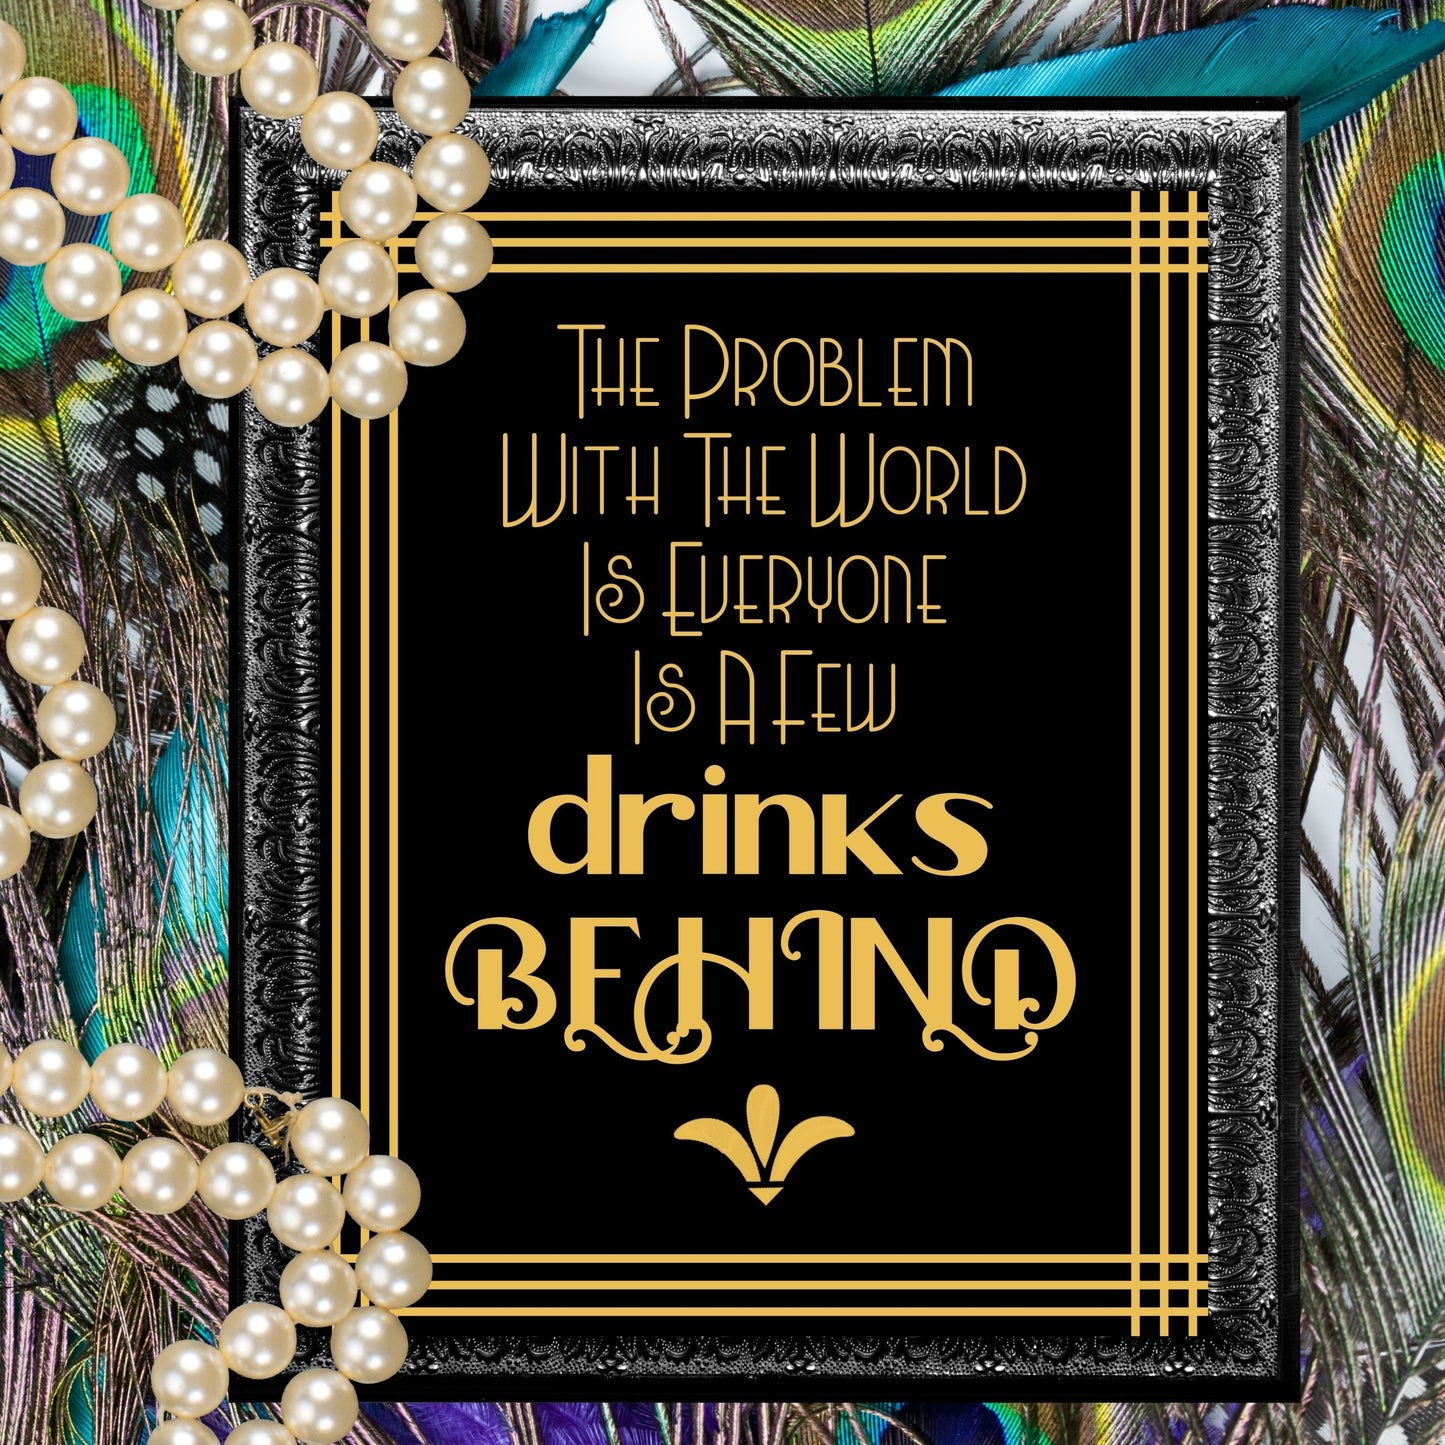 "The Problem With The World Is Everyone Is A Few Drinks Behind" Party Sign, Great Gatsby, Roaring 20's, Printable Party Decor